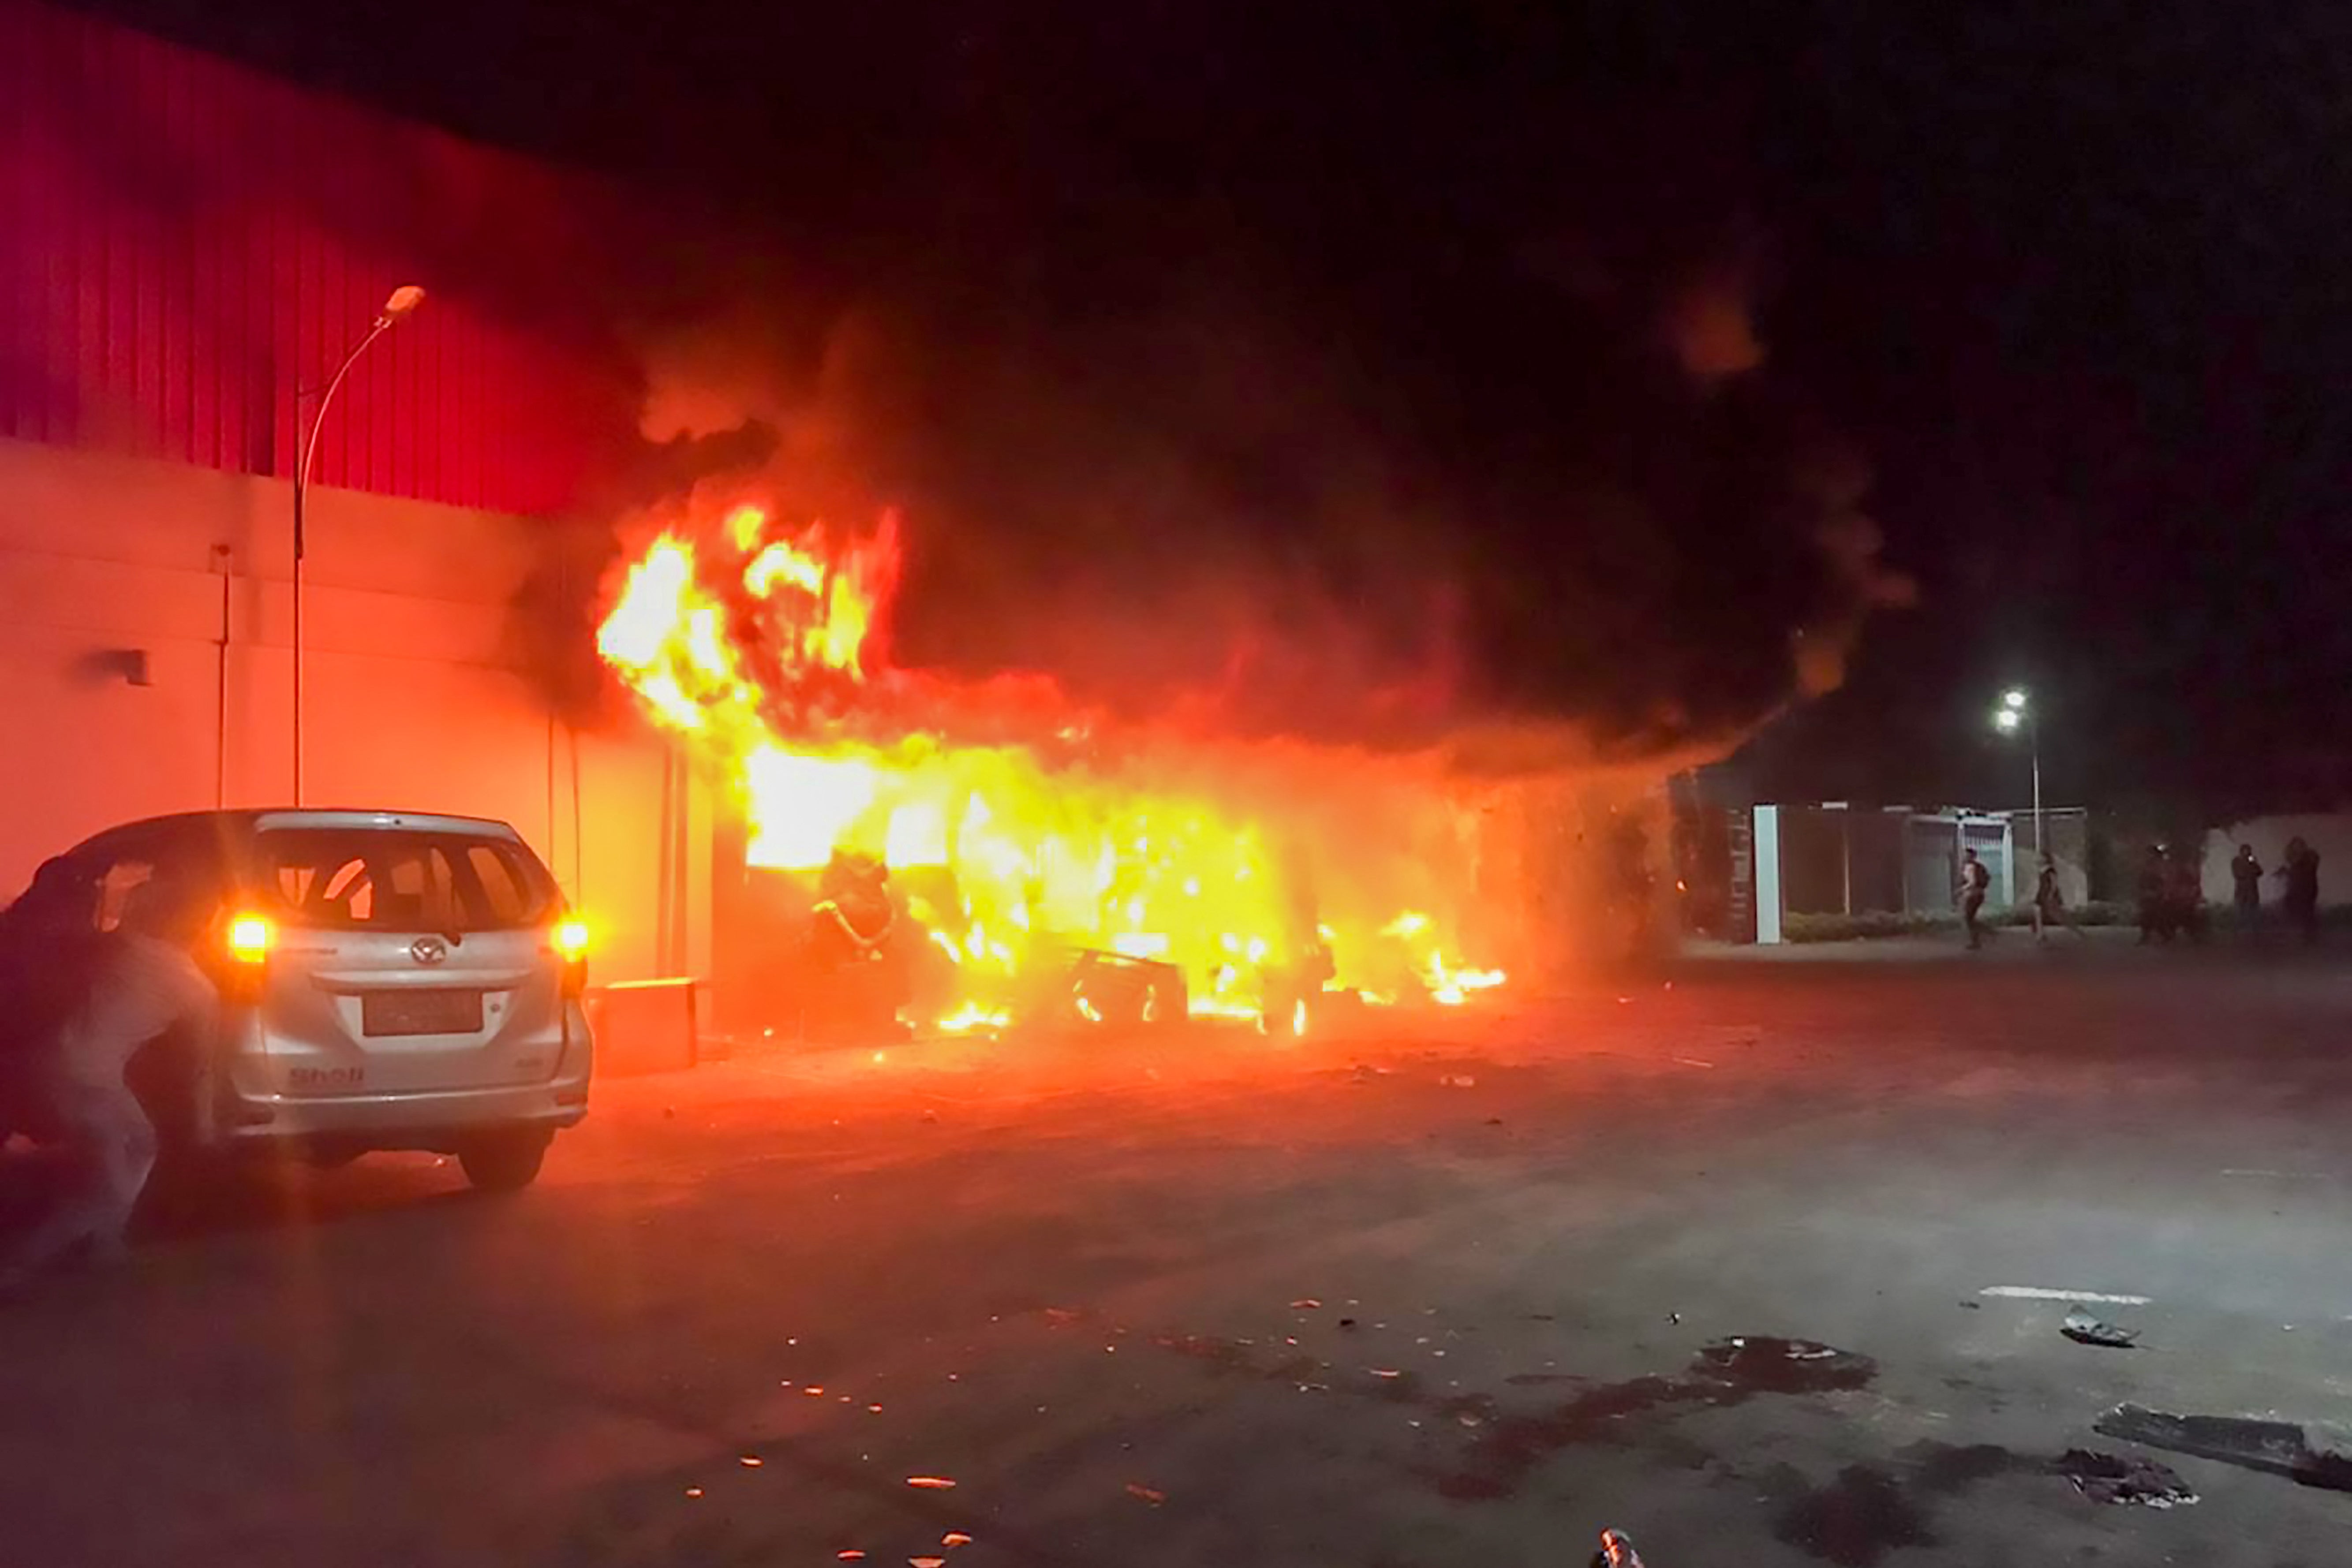 A fire burns at the Double O nightclub where at least 18 people were killed in clashes between two groups in Sorong in Indonesia’s West Papua province on 25 January 2022